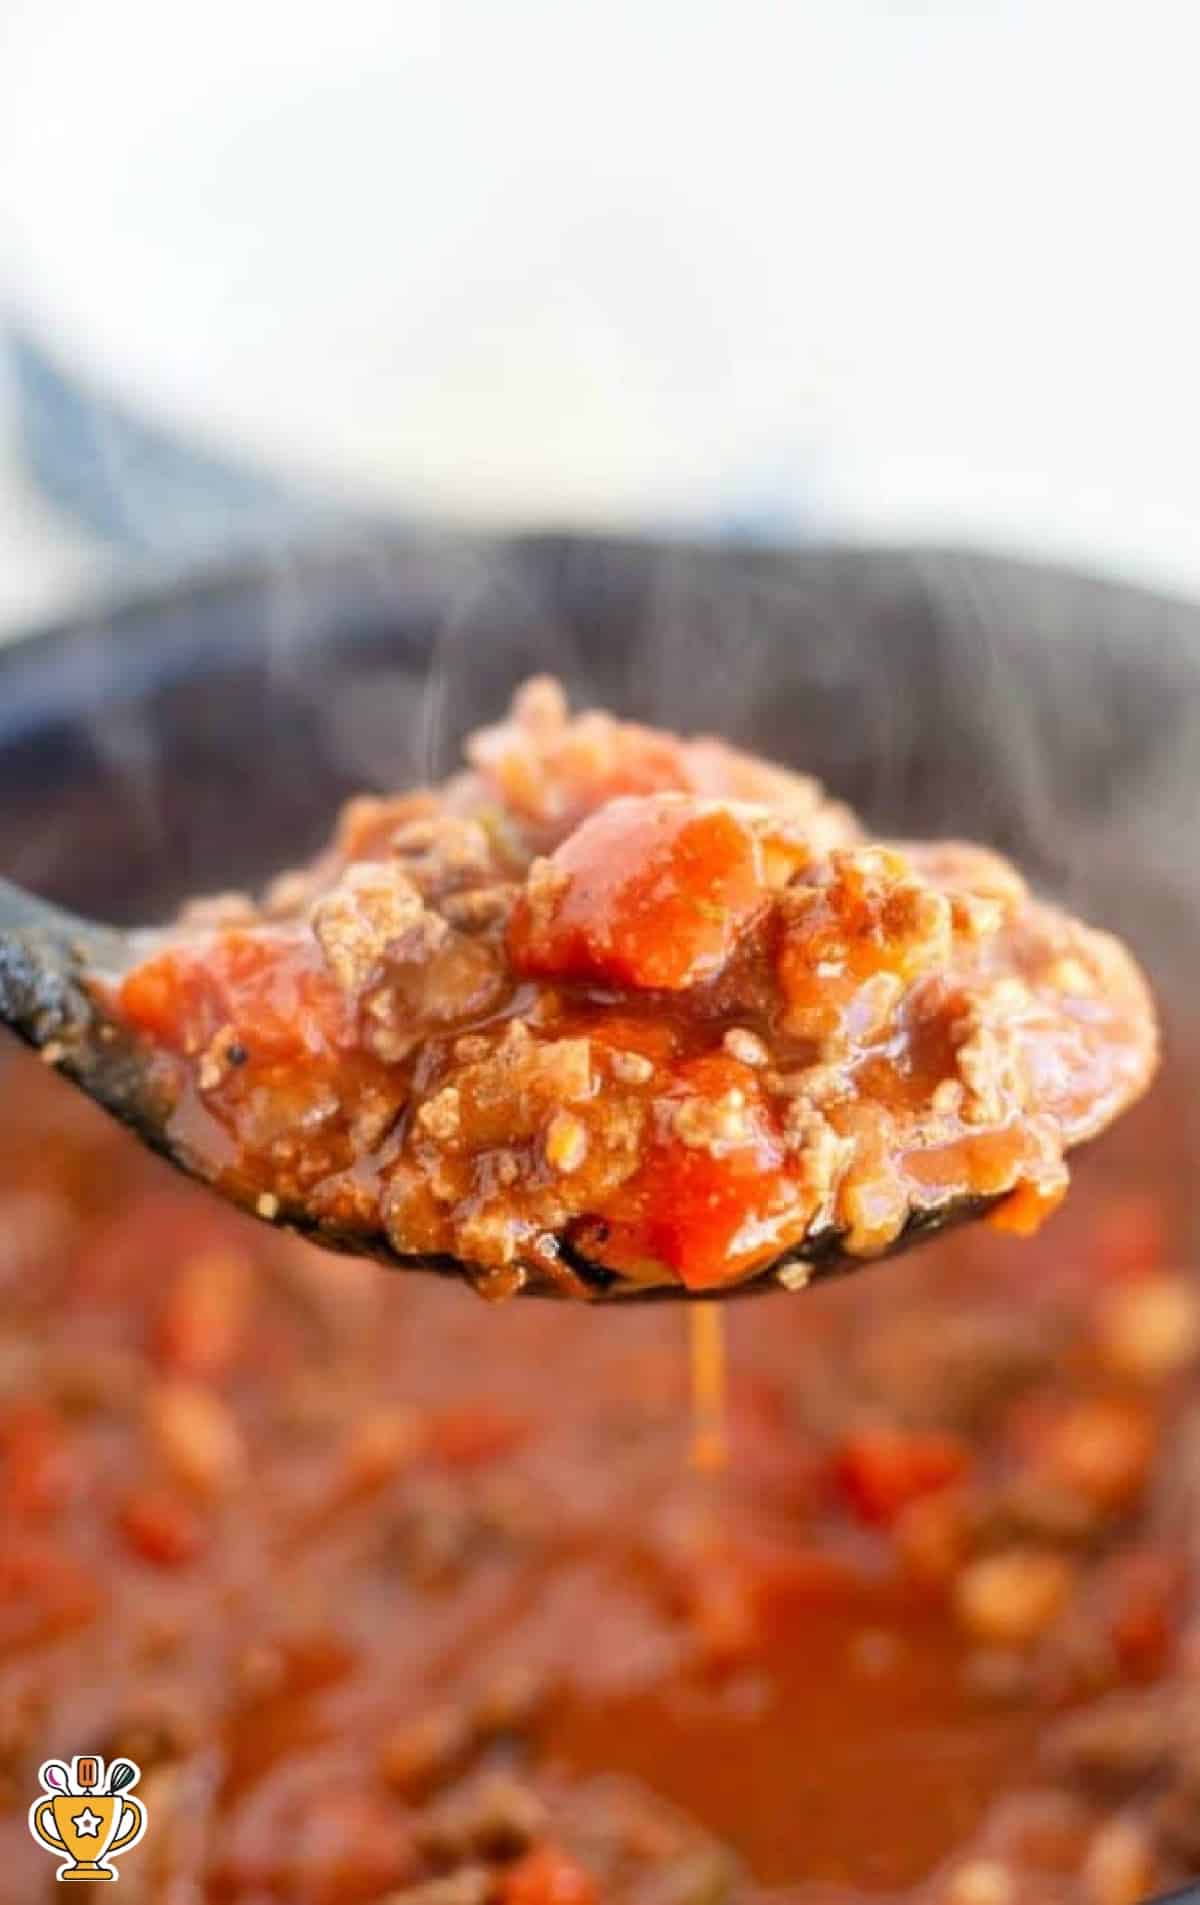 spoonful of chili that is steaming hot